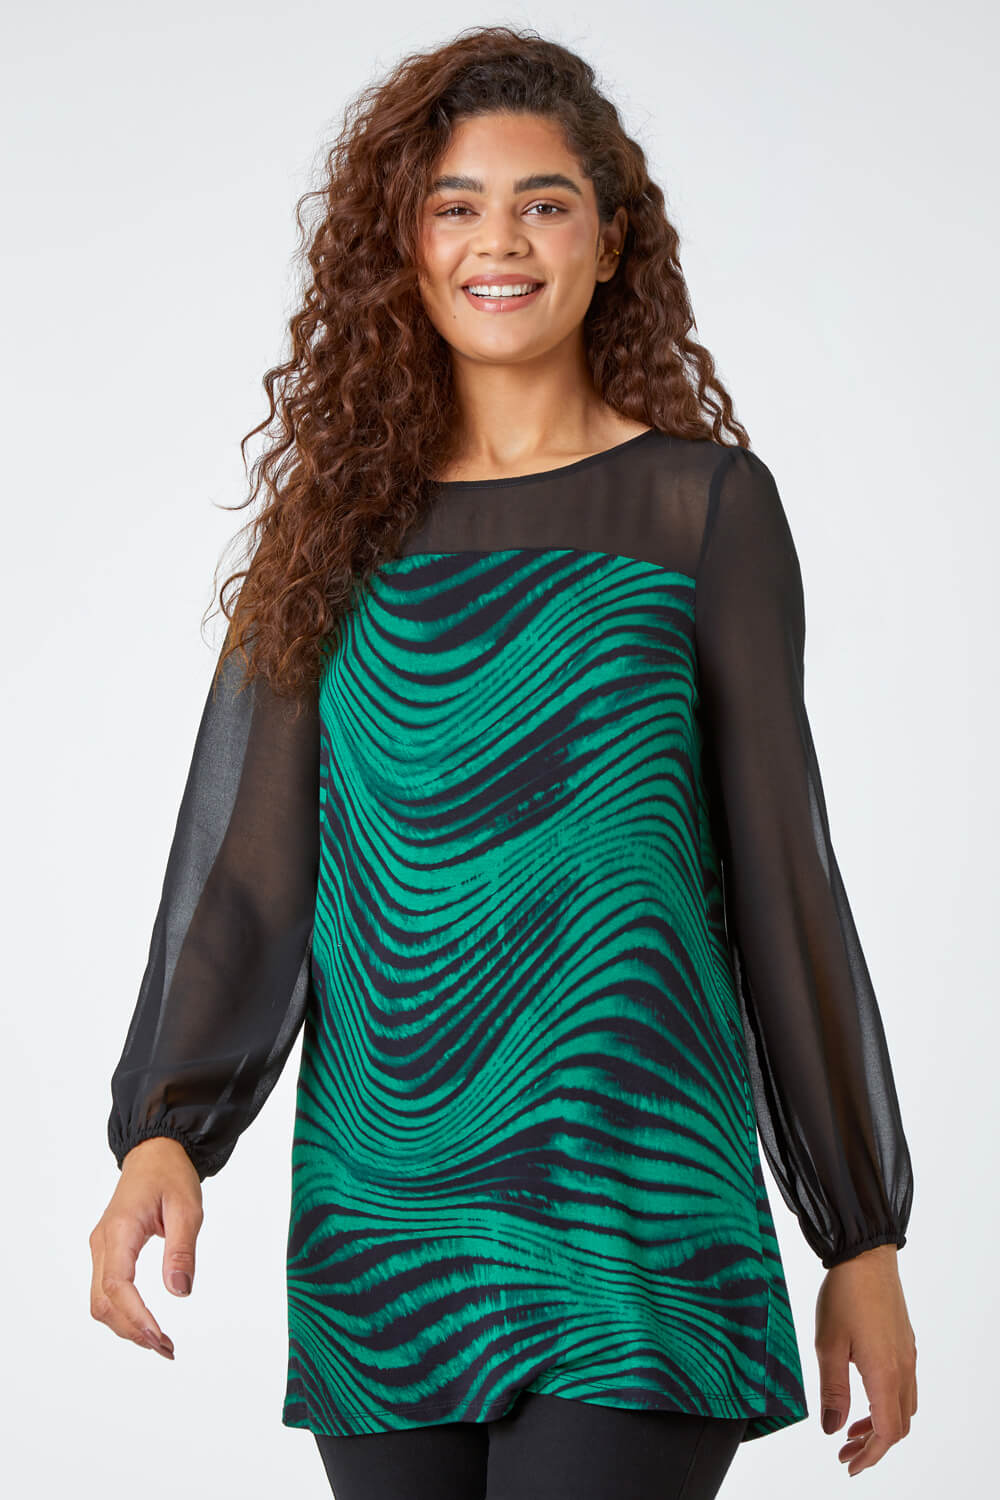 Abstract Print Chiffon Sleeve Stretch Top